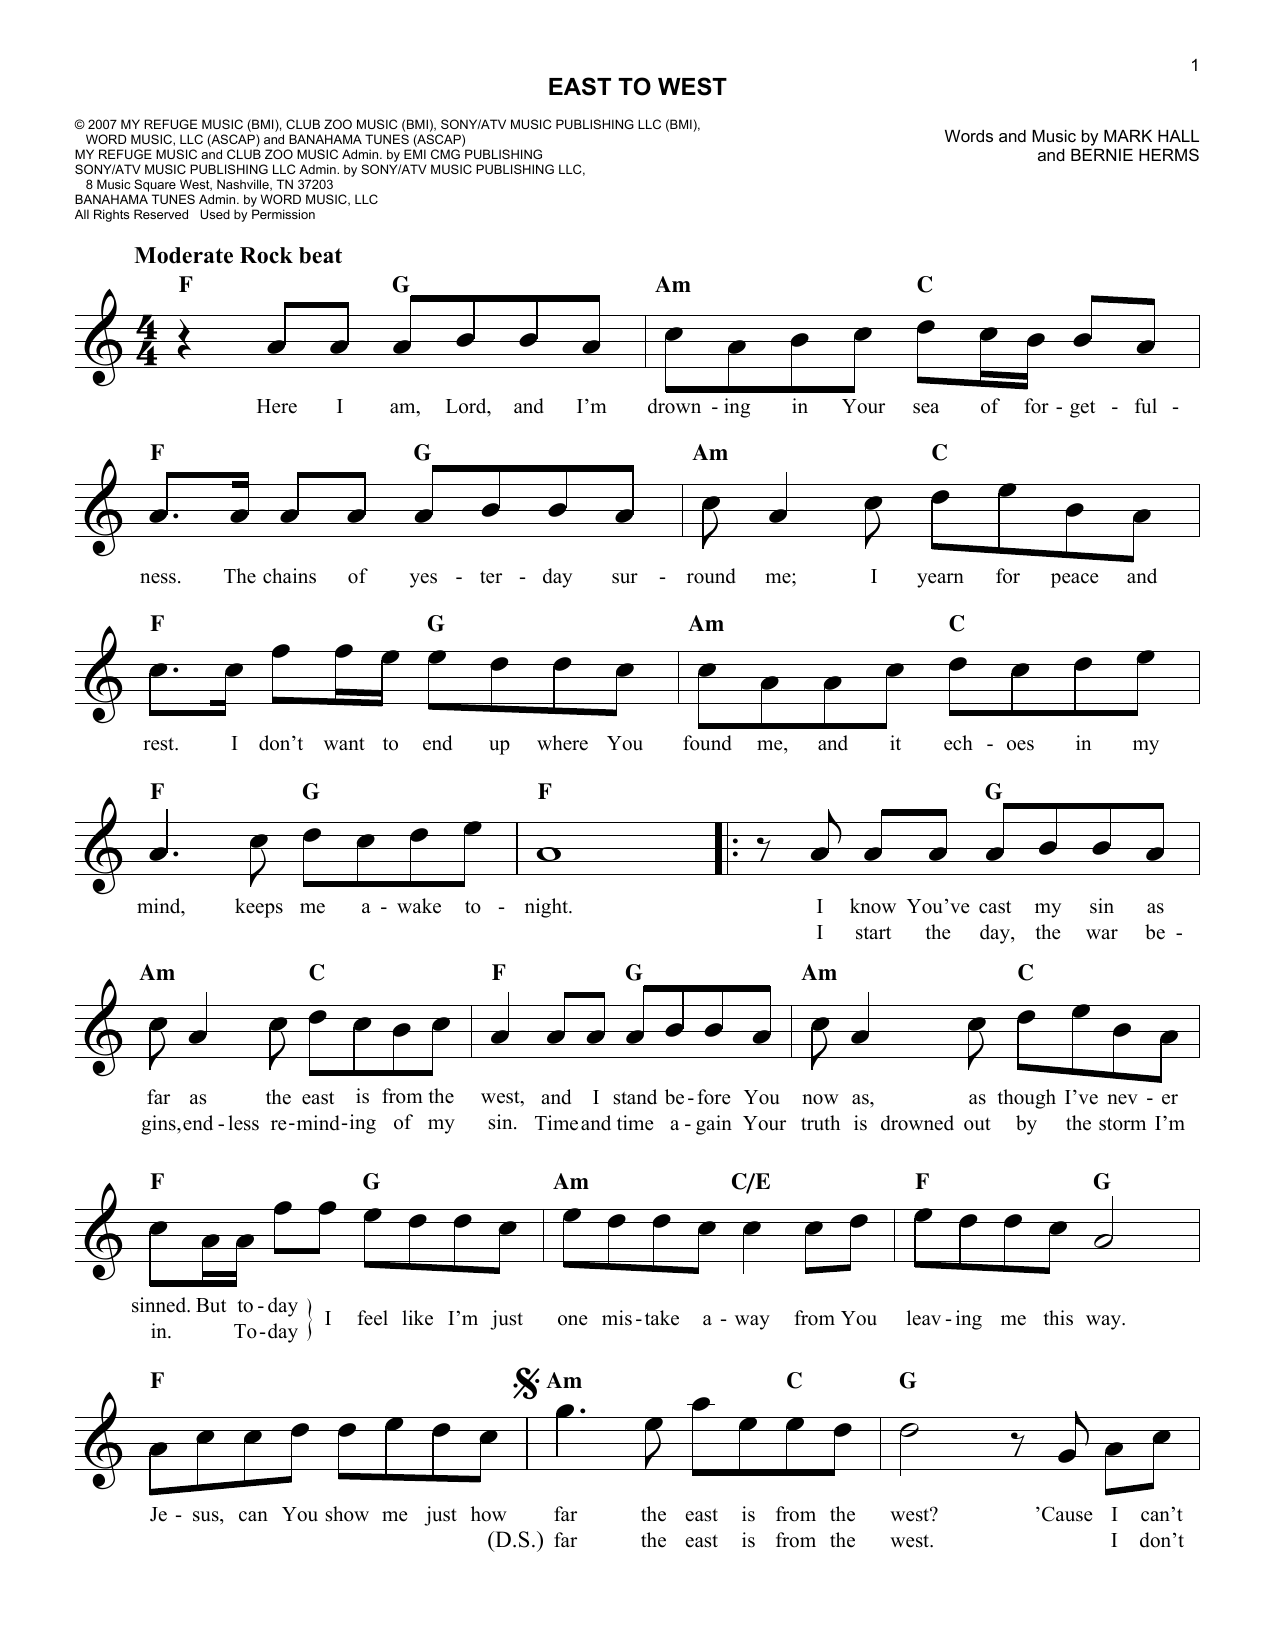 Download Casting Crowns East To West Sheet Music